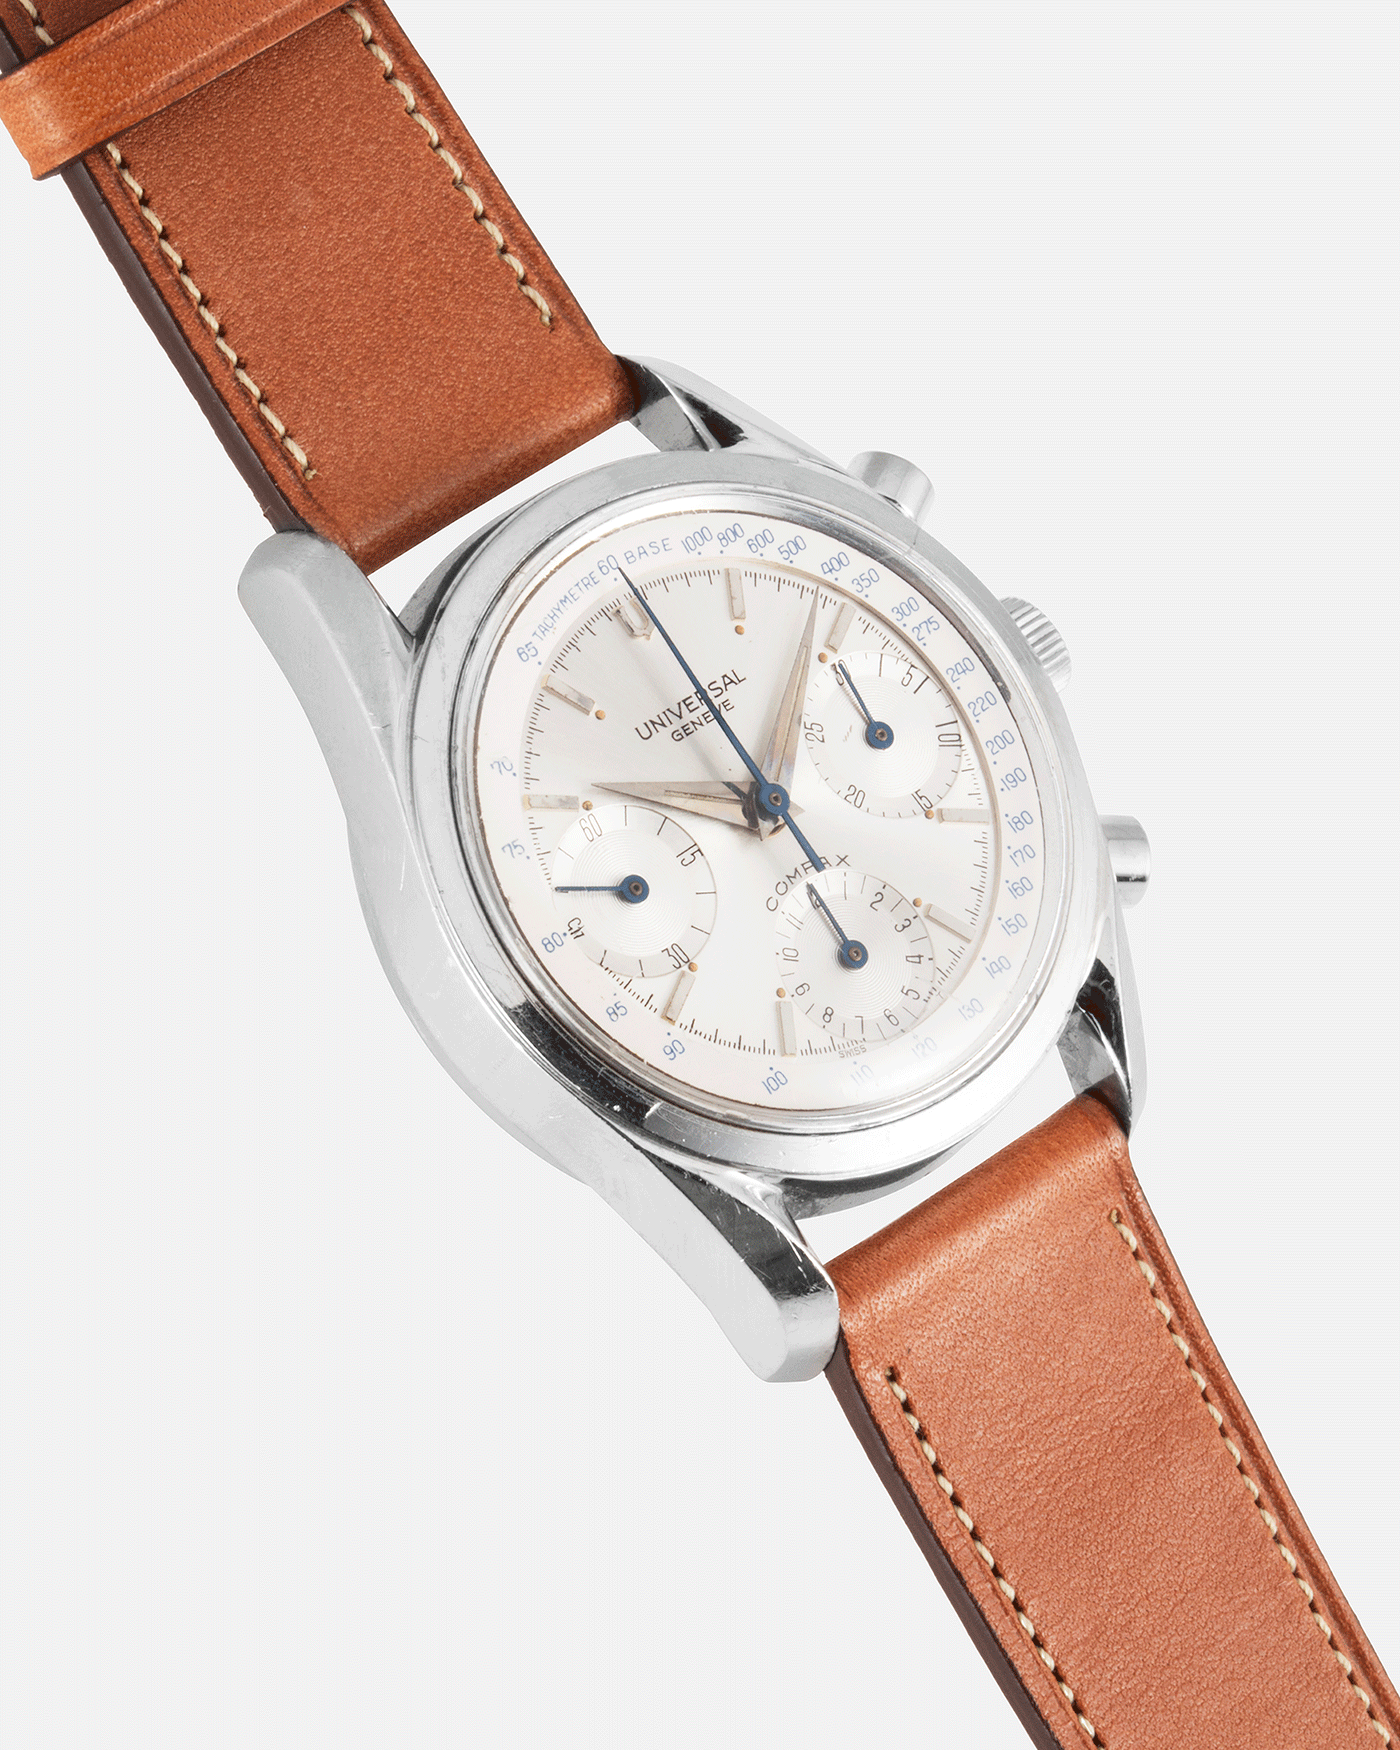 Universal Geneve Compax 22705-1 Chronograph Vintage Watch | S.Song Vintage Watches Mark Eleven